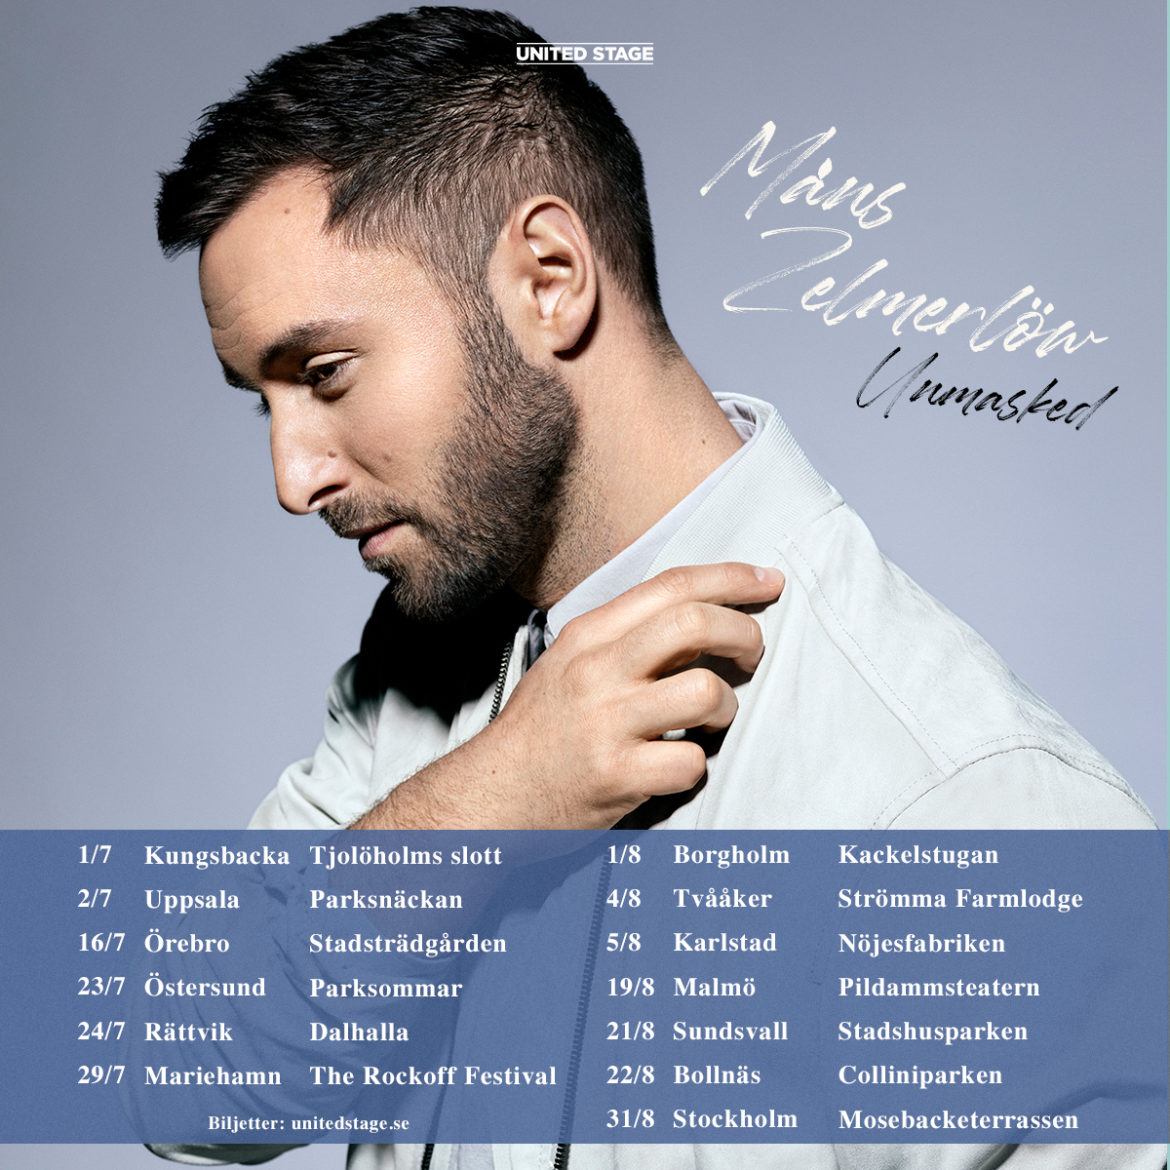 Måns on tour this summer !